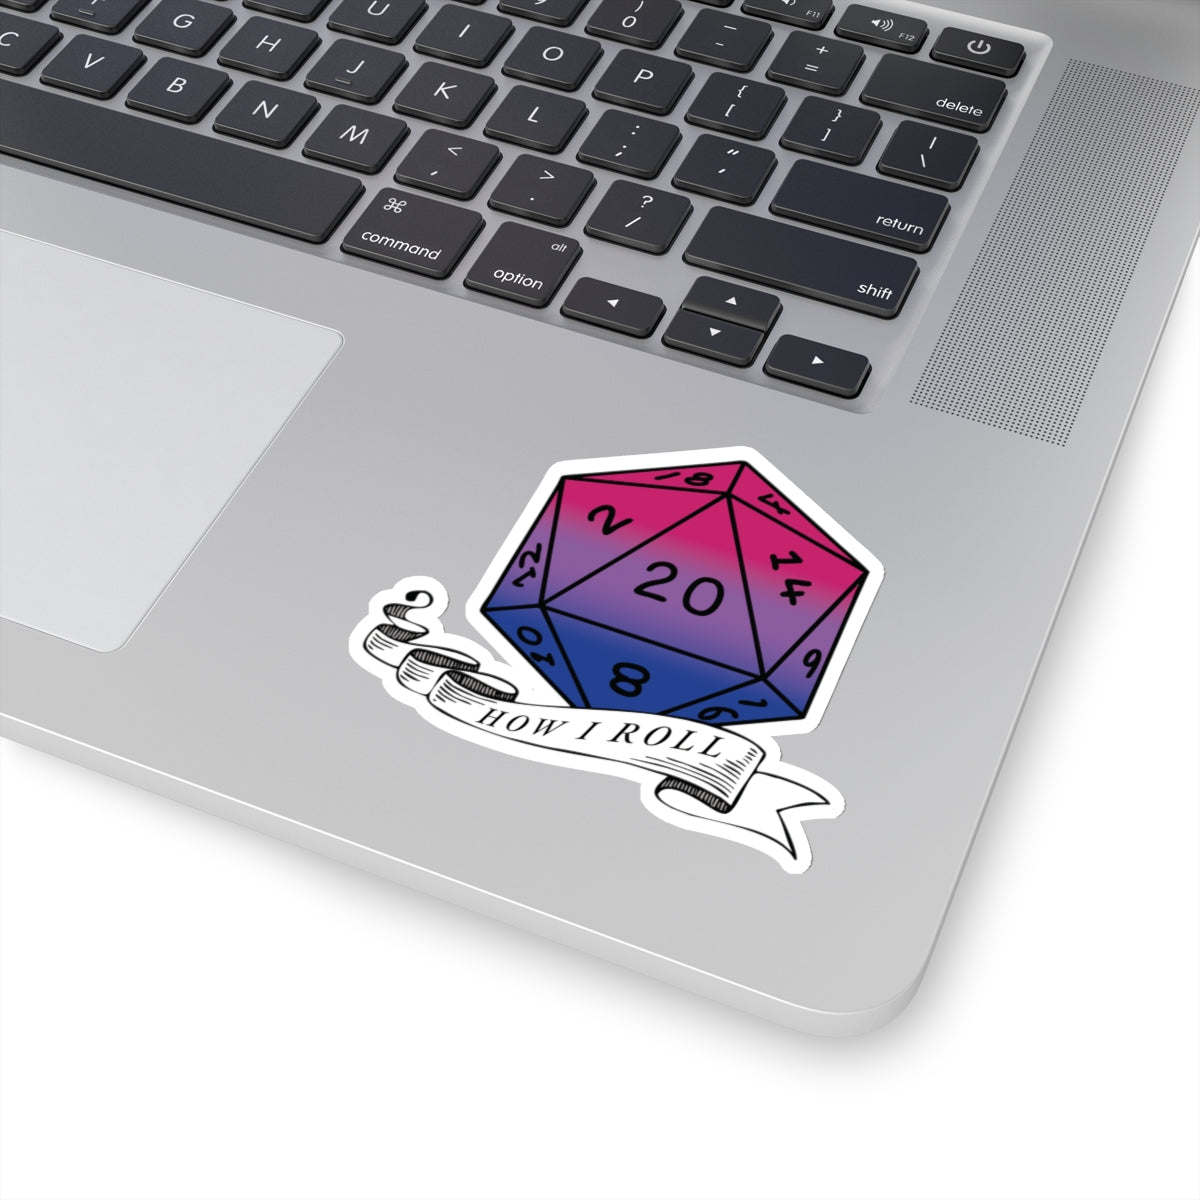 Bisexual Flag PRIDE D20 |This is How I Roll Sticker